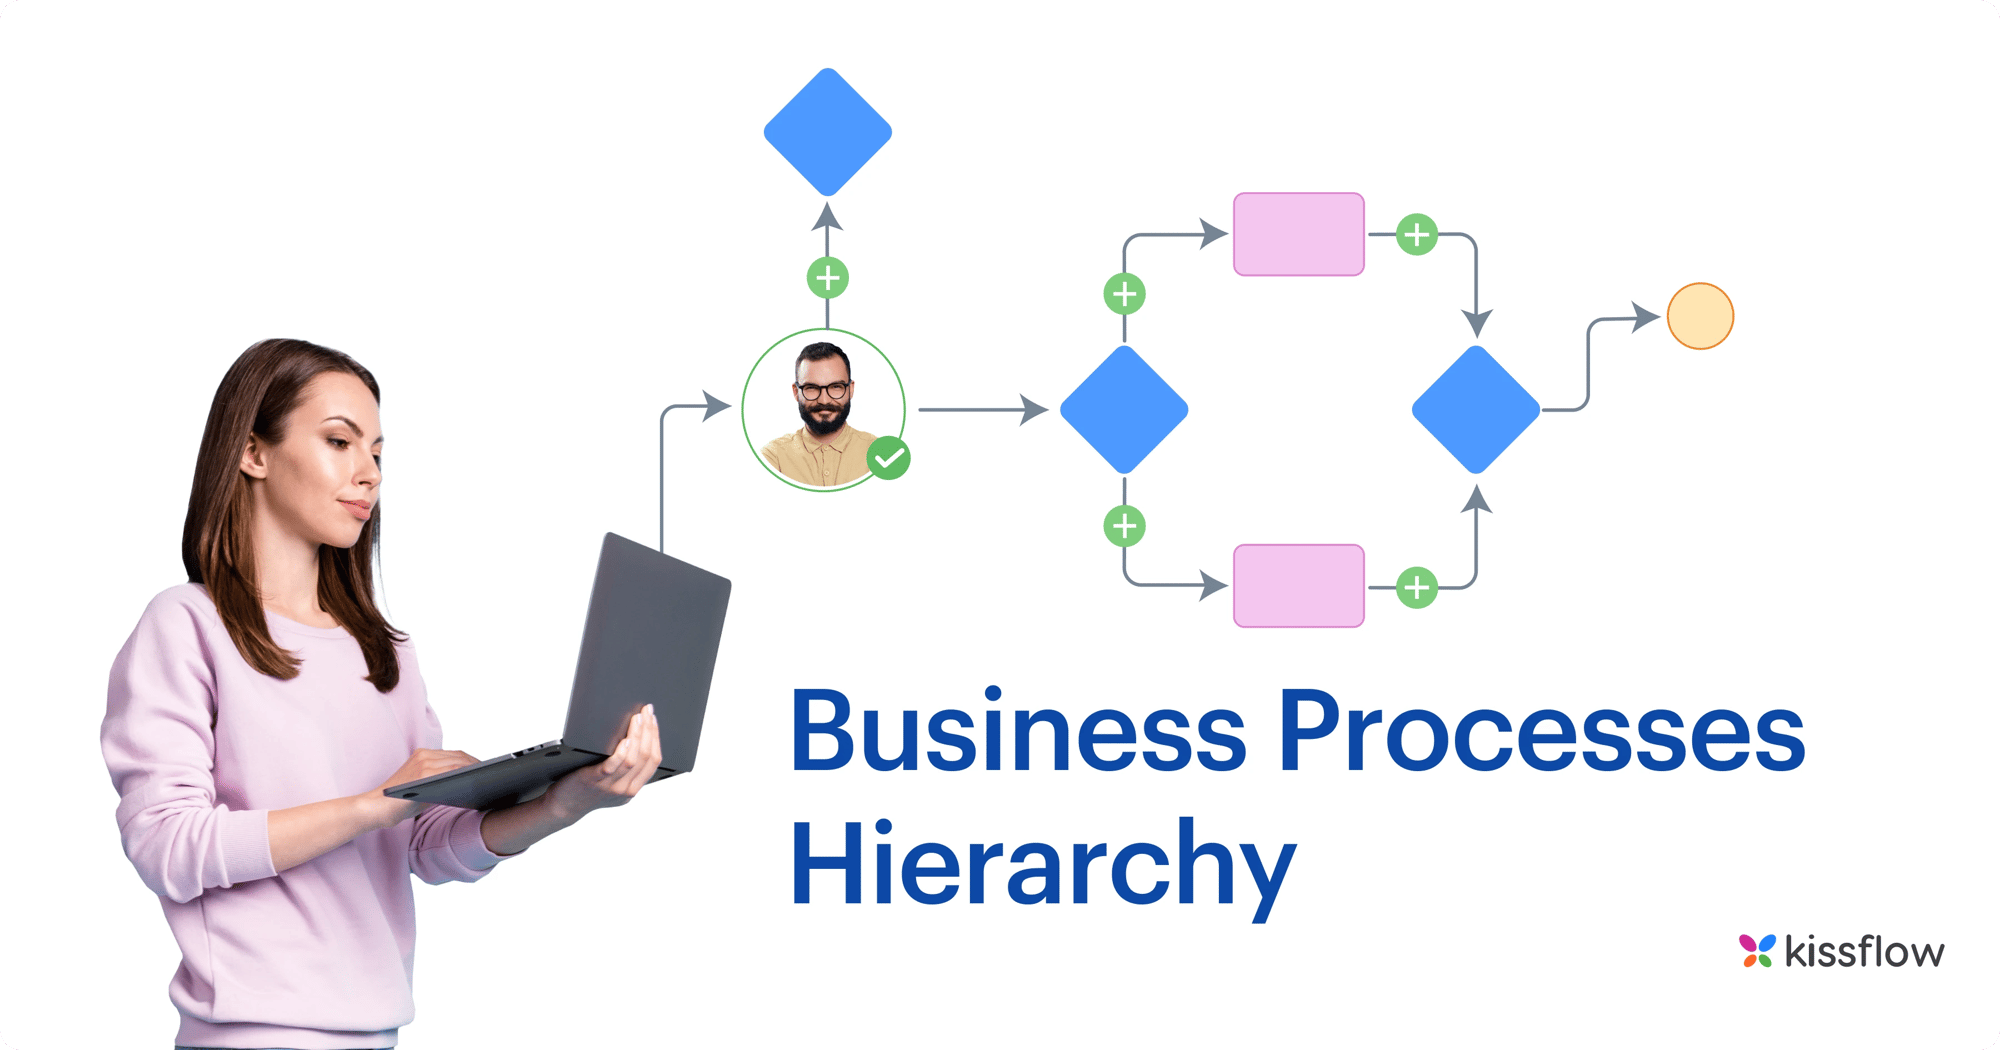 og_business_processes_hierarchy_the_ultimate_guide-1